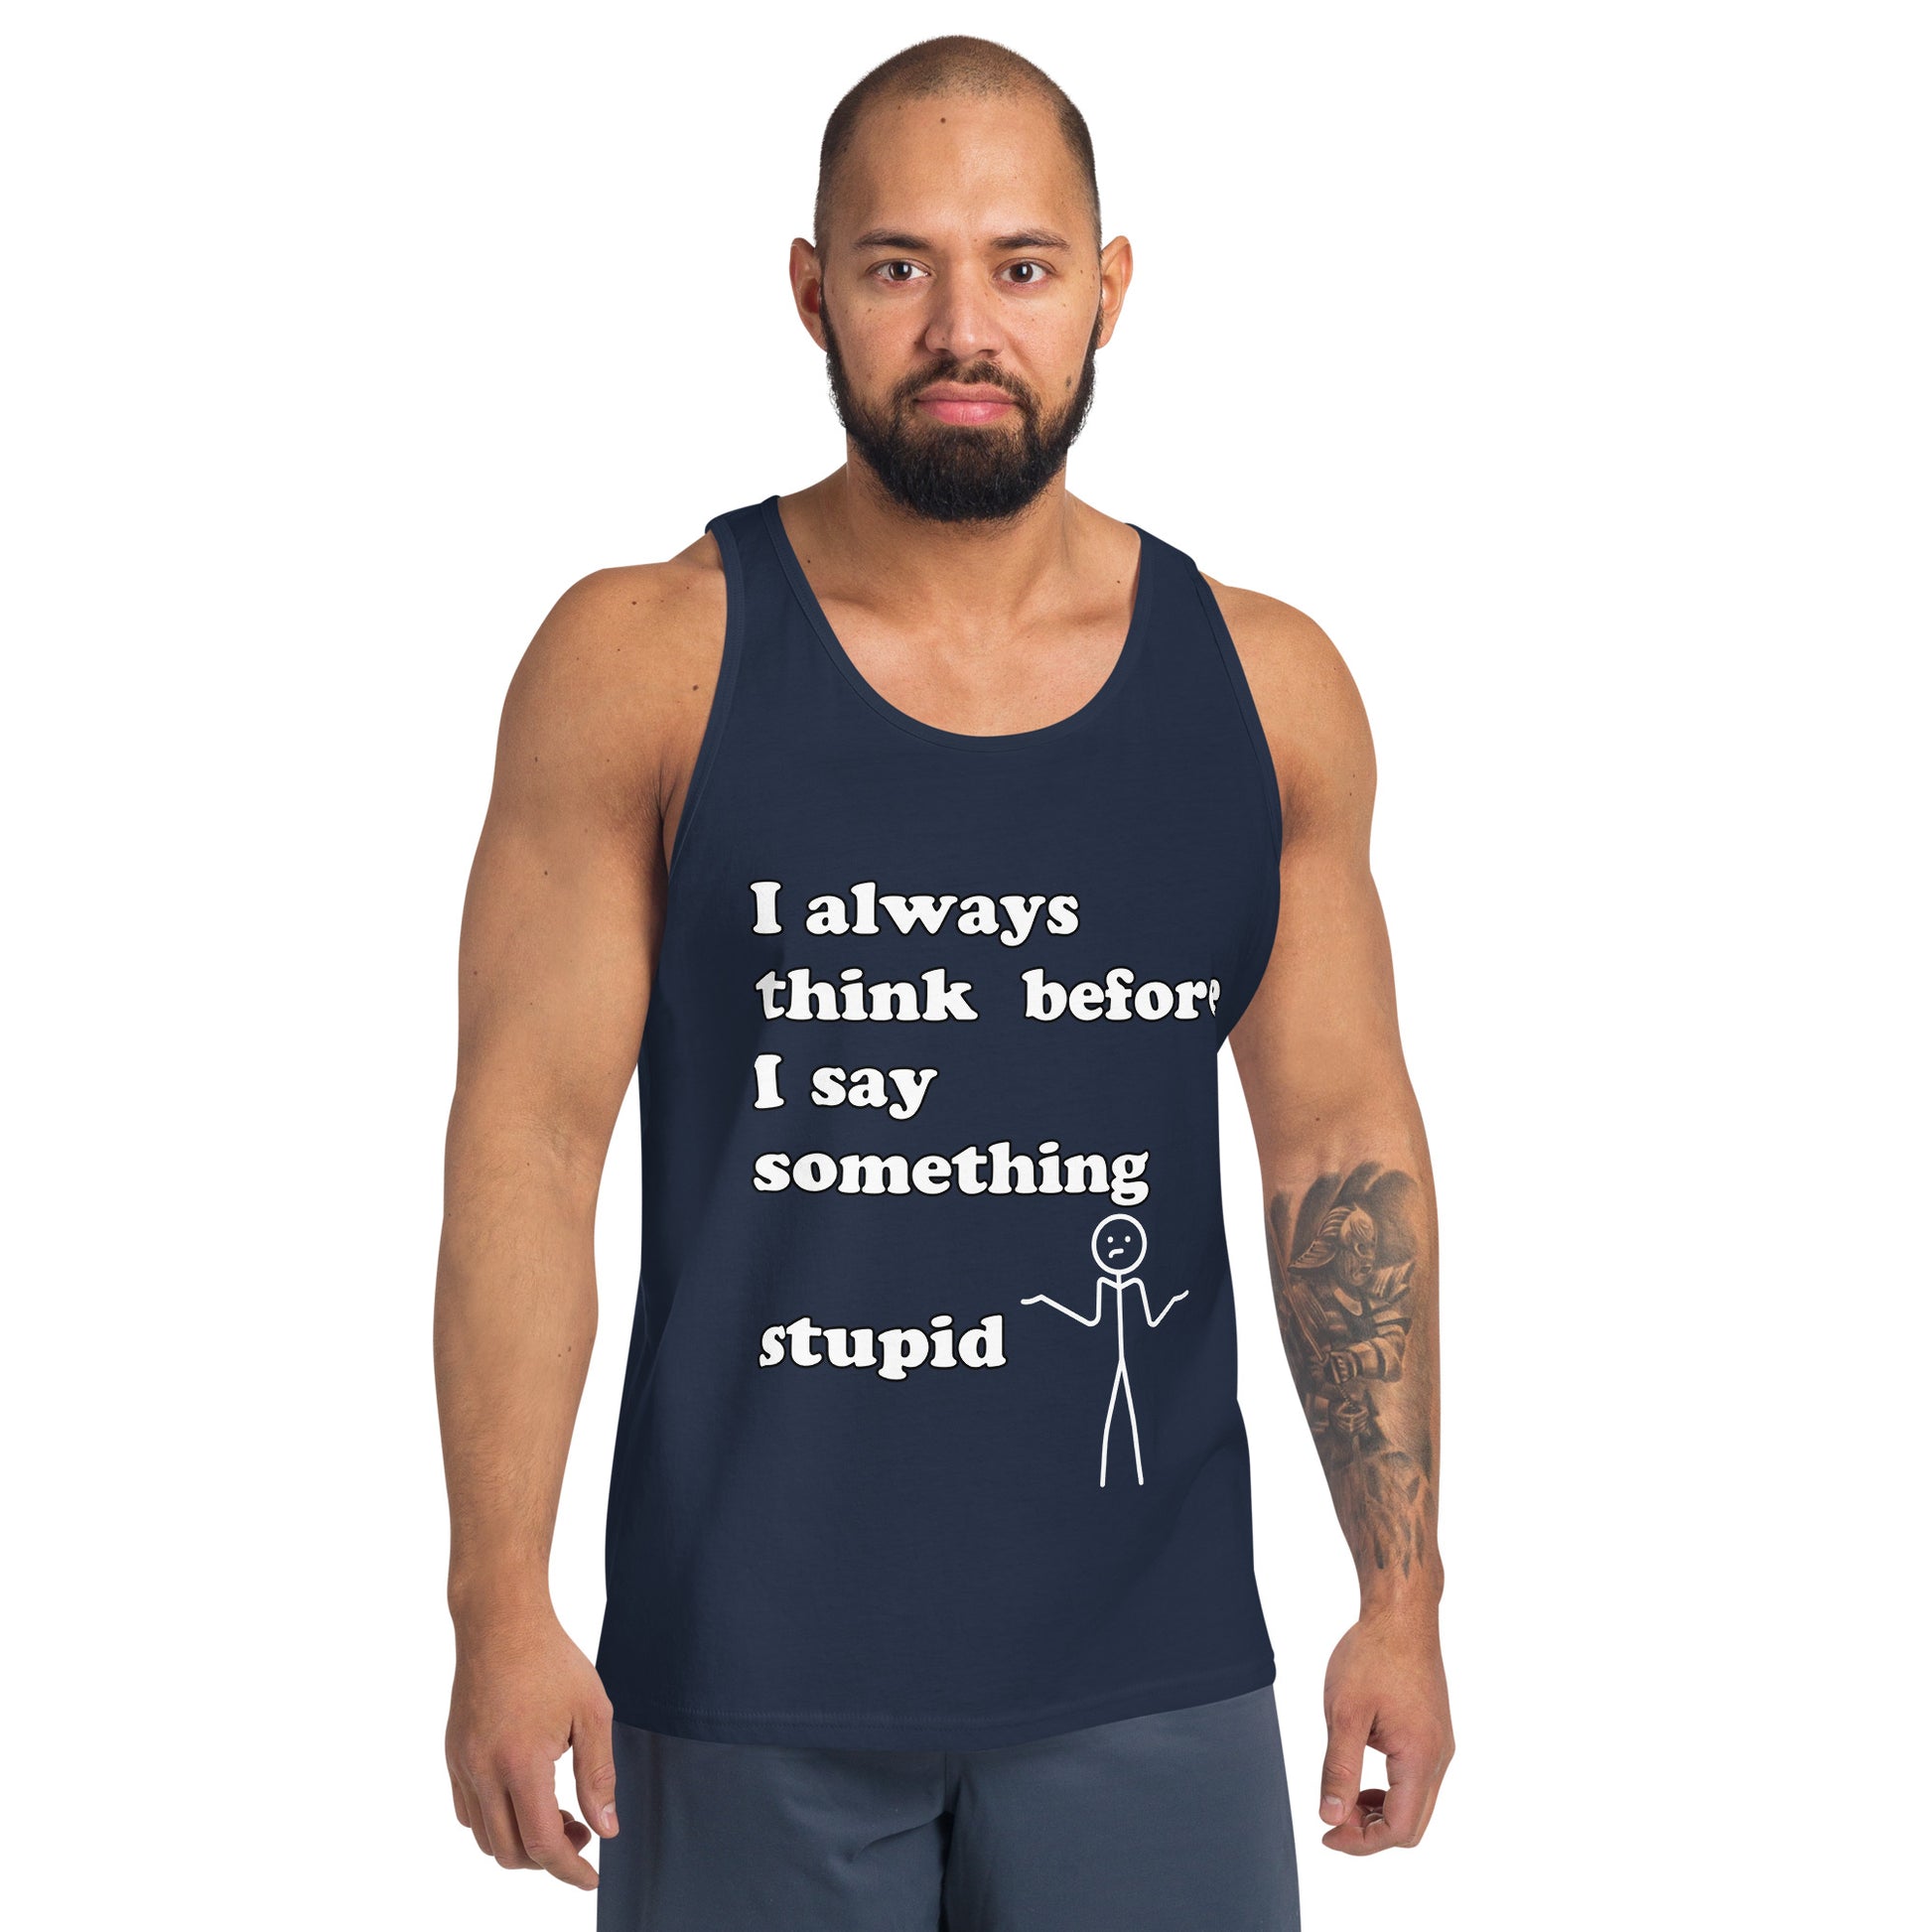 Man with navy blue tank top with text "I always think before I say something stupid"